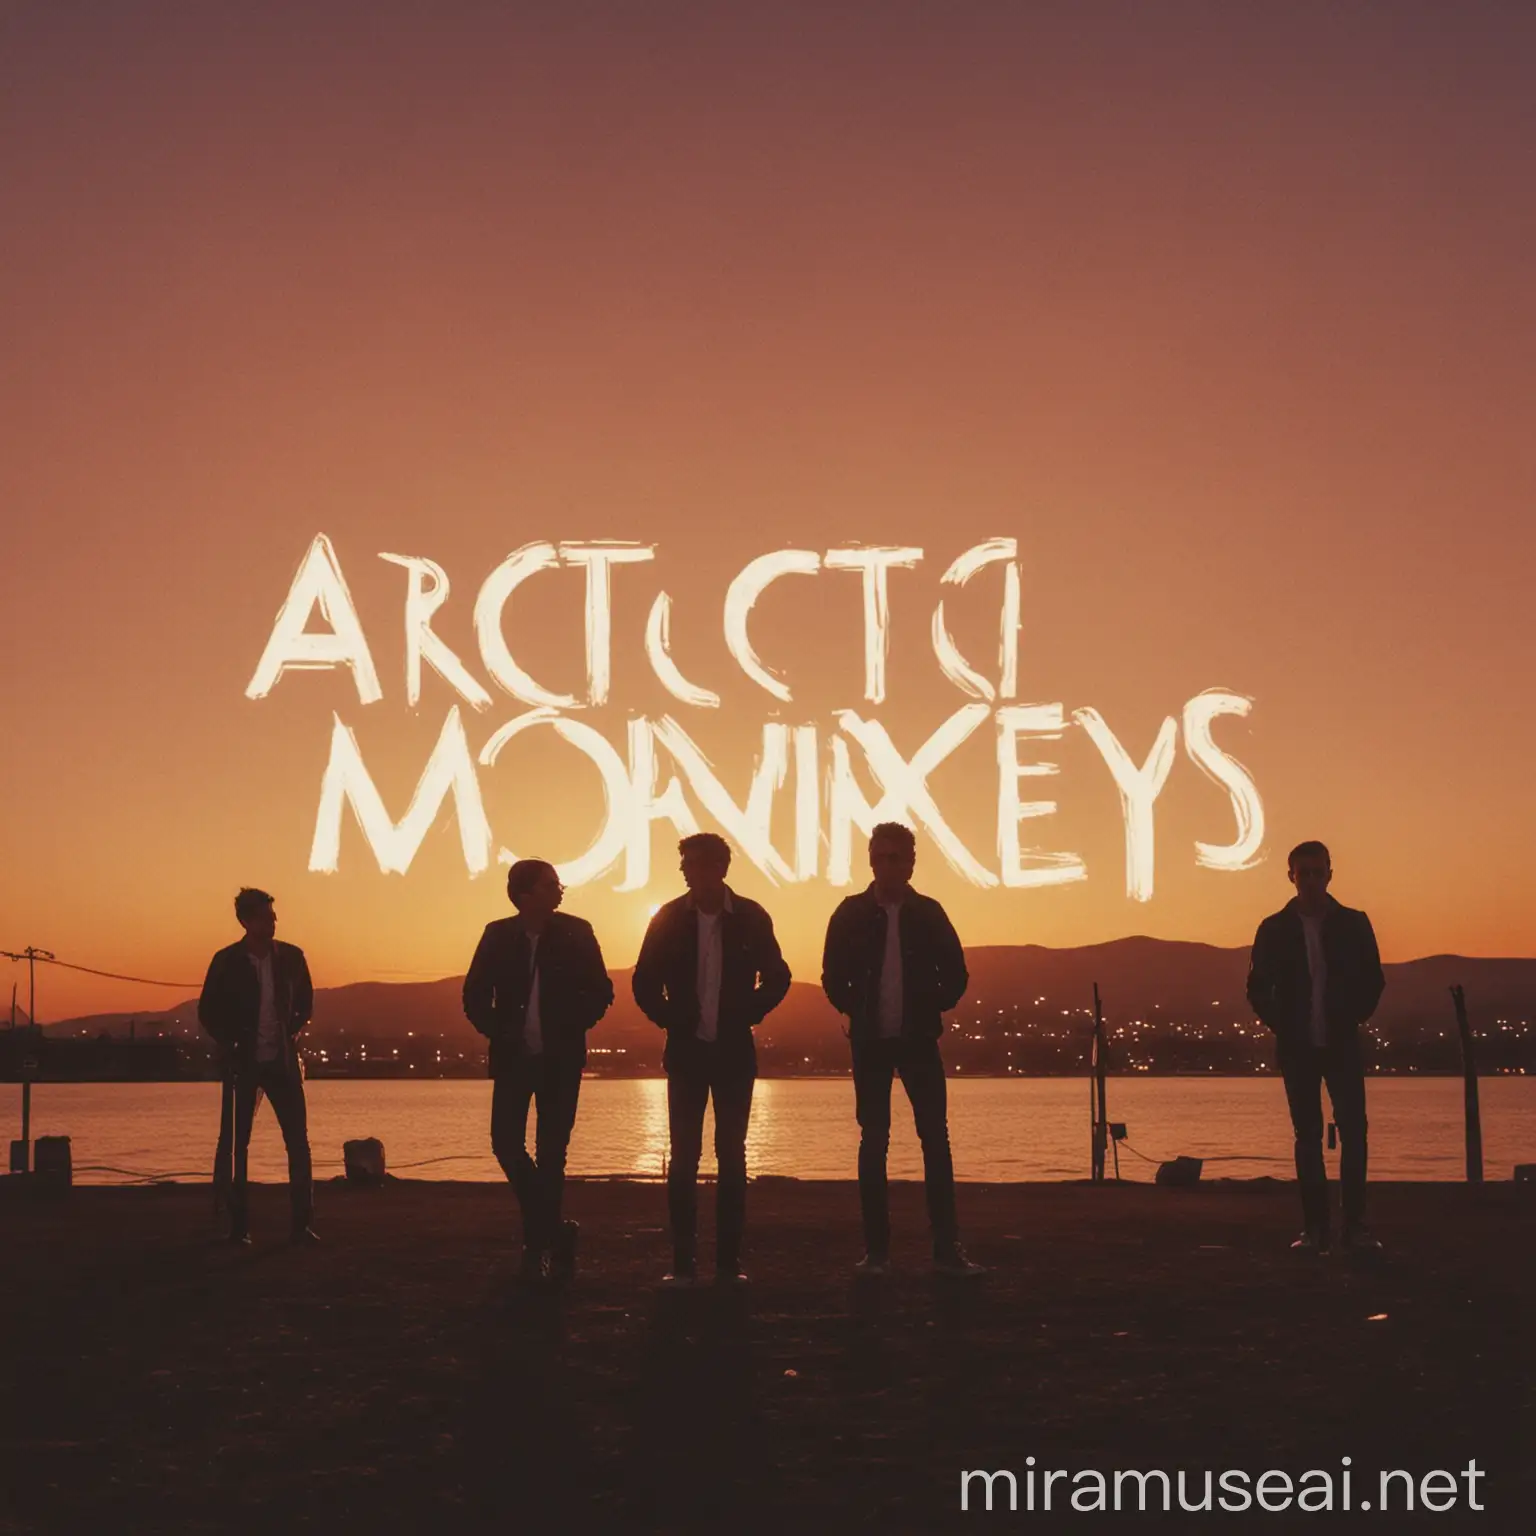 Arctic Monkeys Silhouetted Against Stunning Sunset Sky